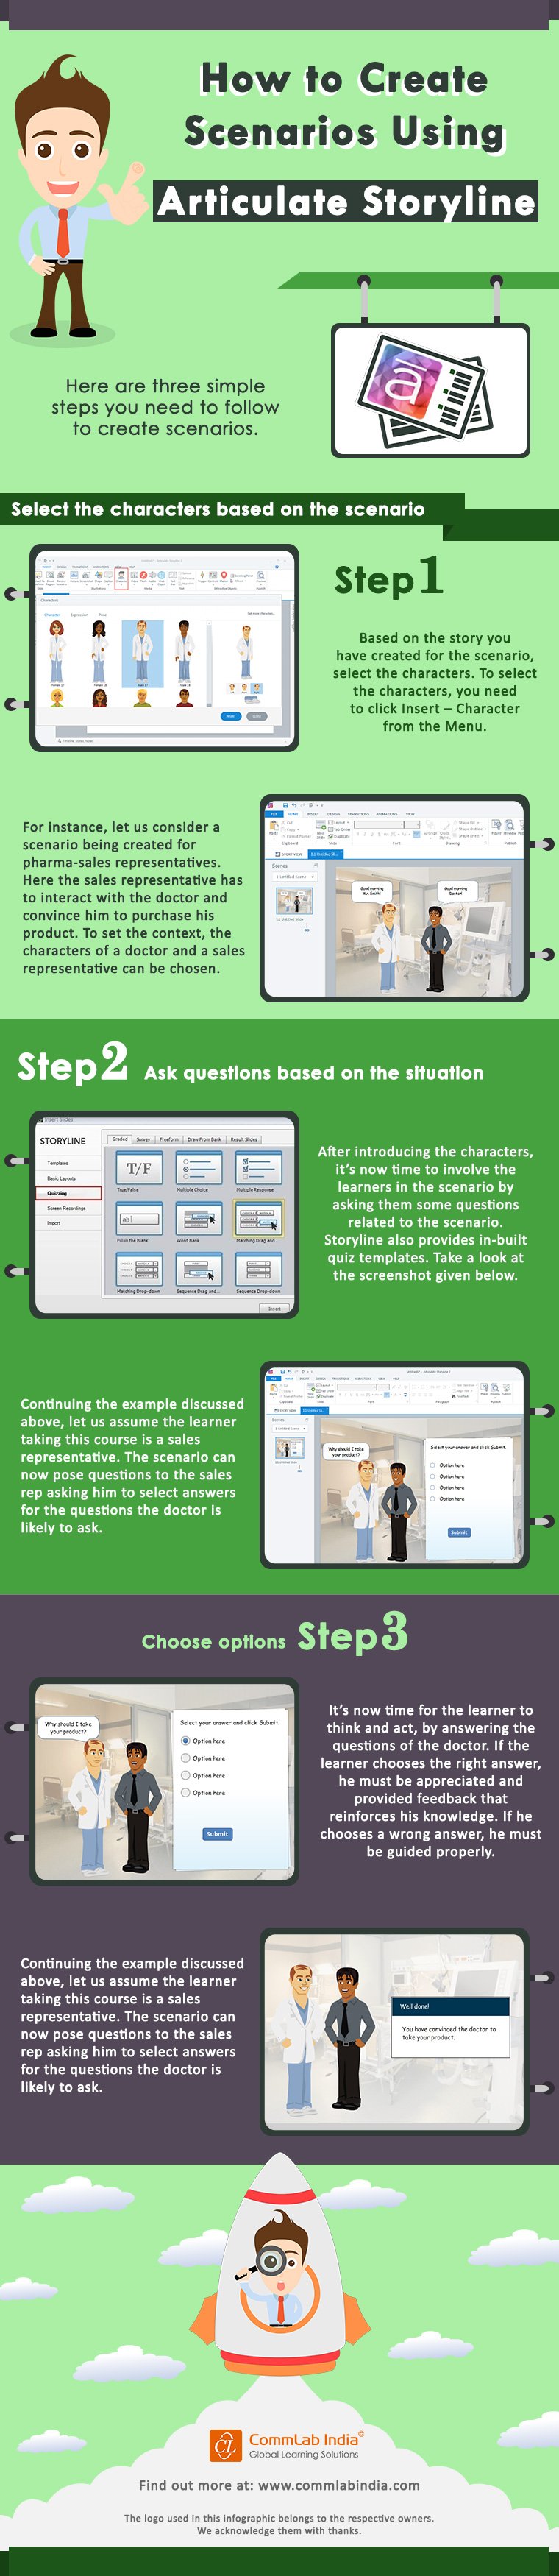 3 Easy Steps to Create Scenarios Using Articulate Storyline [Infographic]